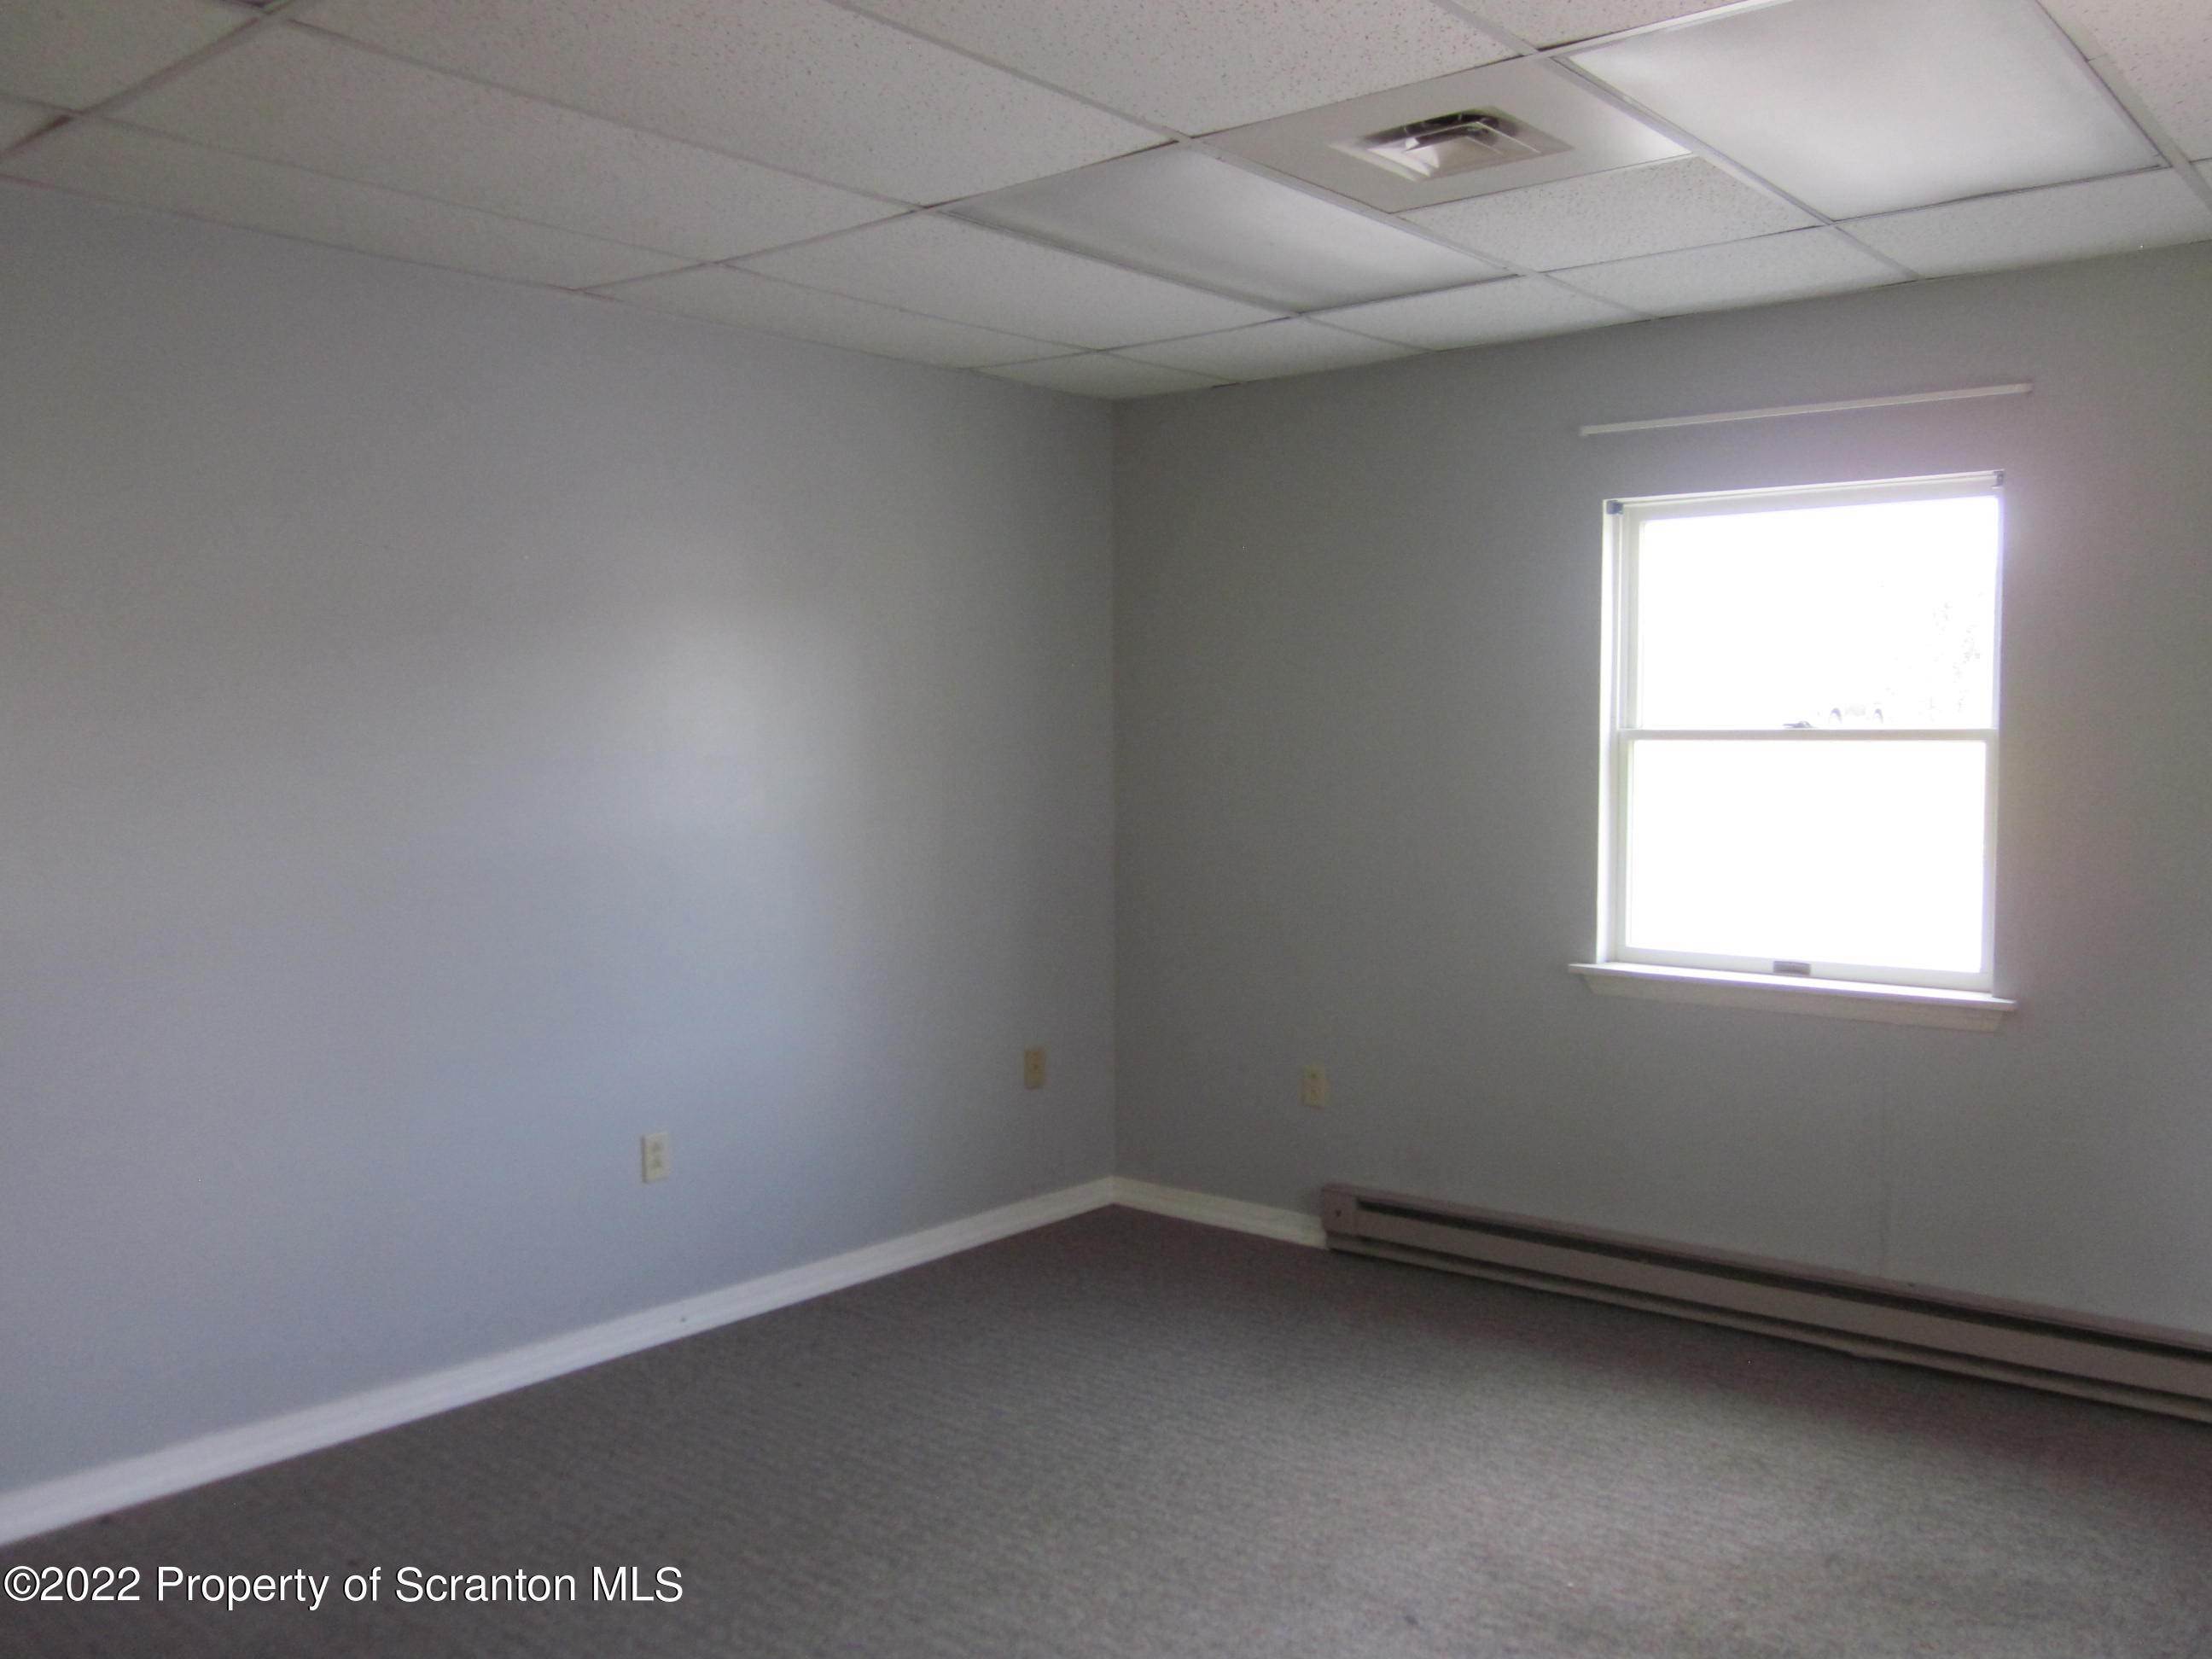 19. Commercial for Rent at 3 Abington Executive Clarks Summit, Pennsylvania 18411 United States